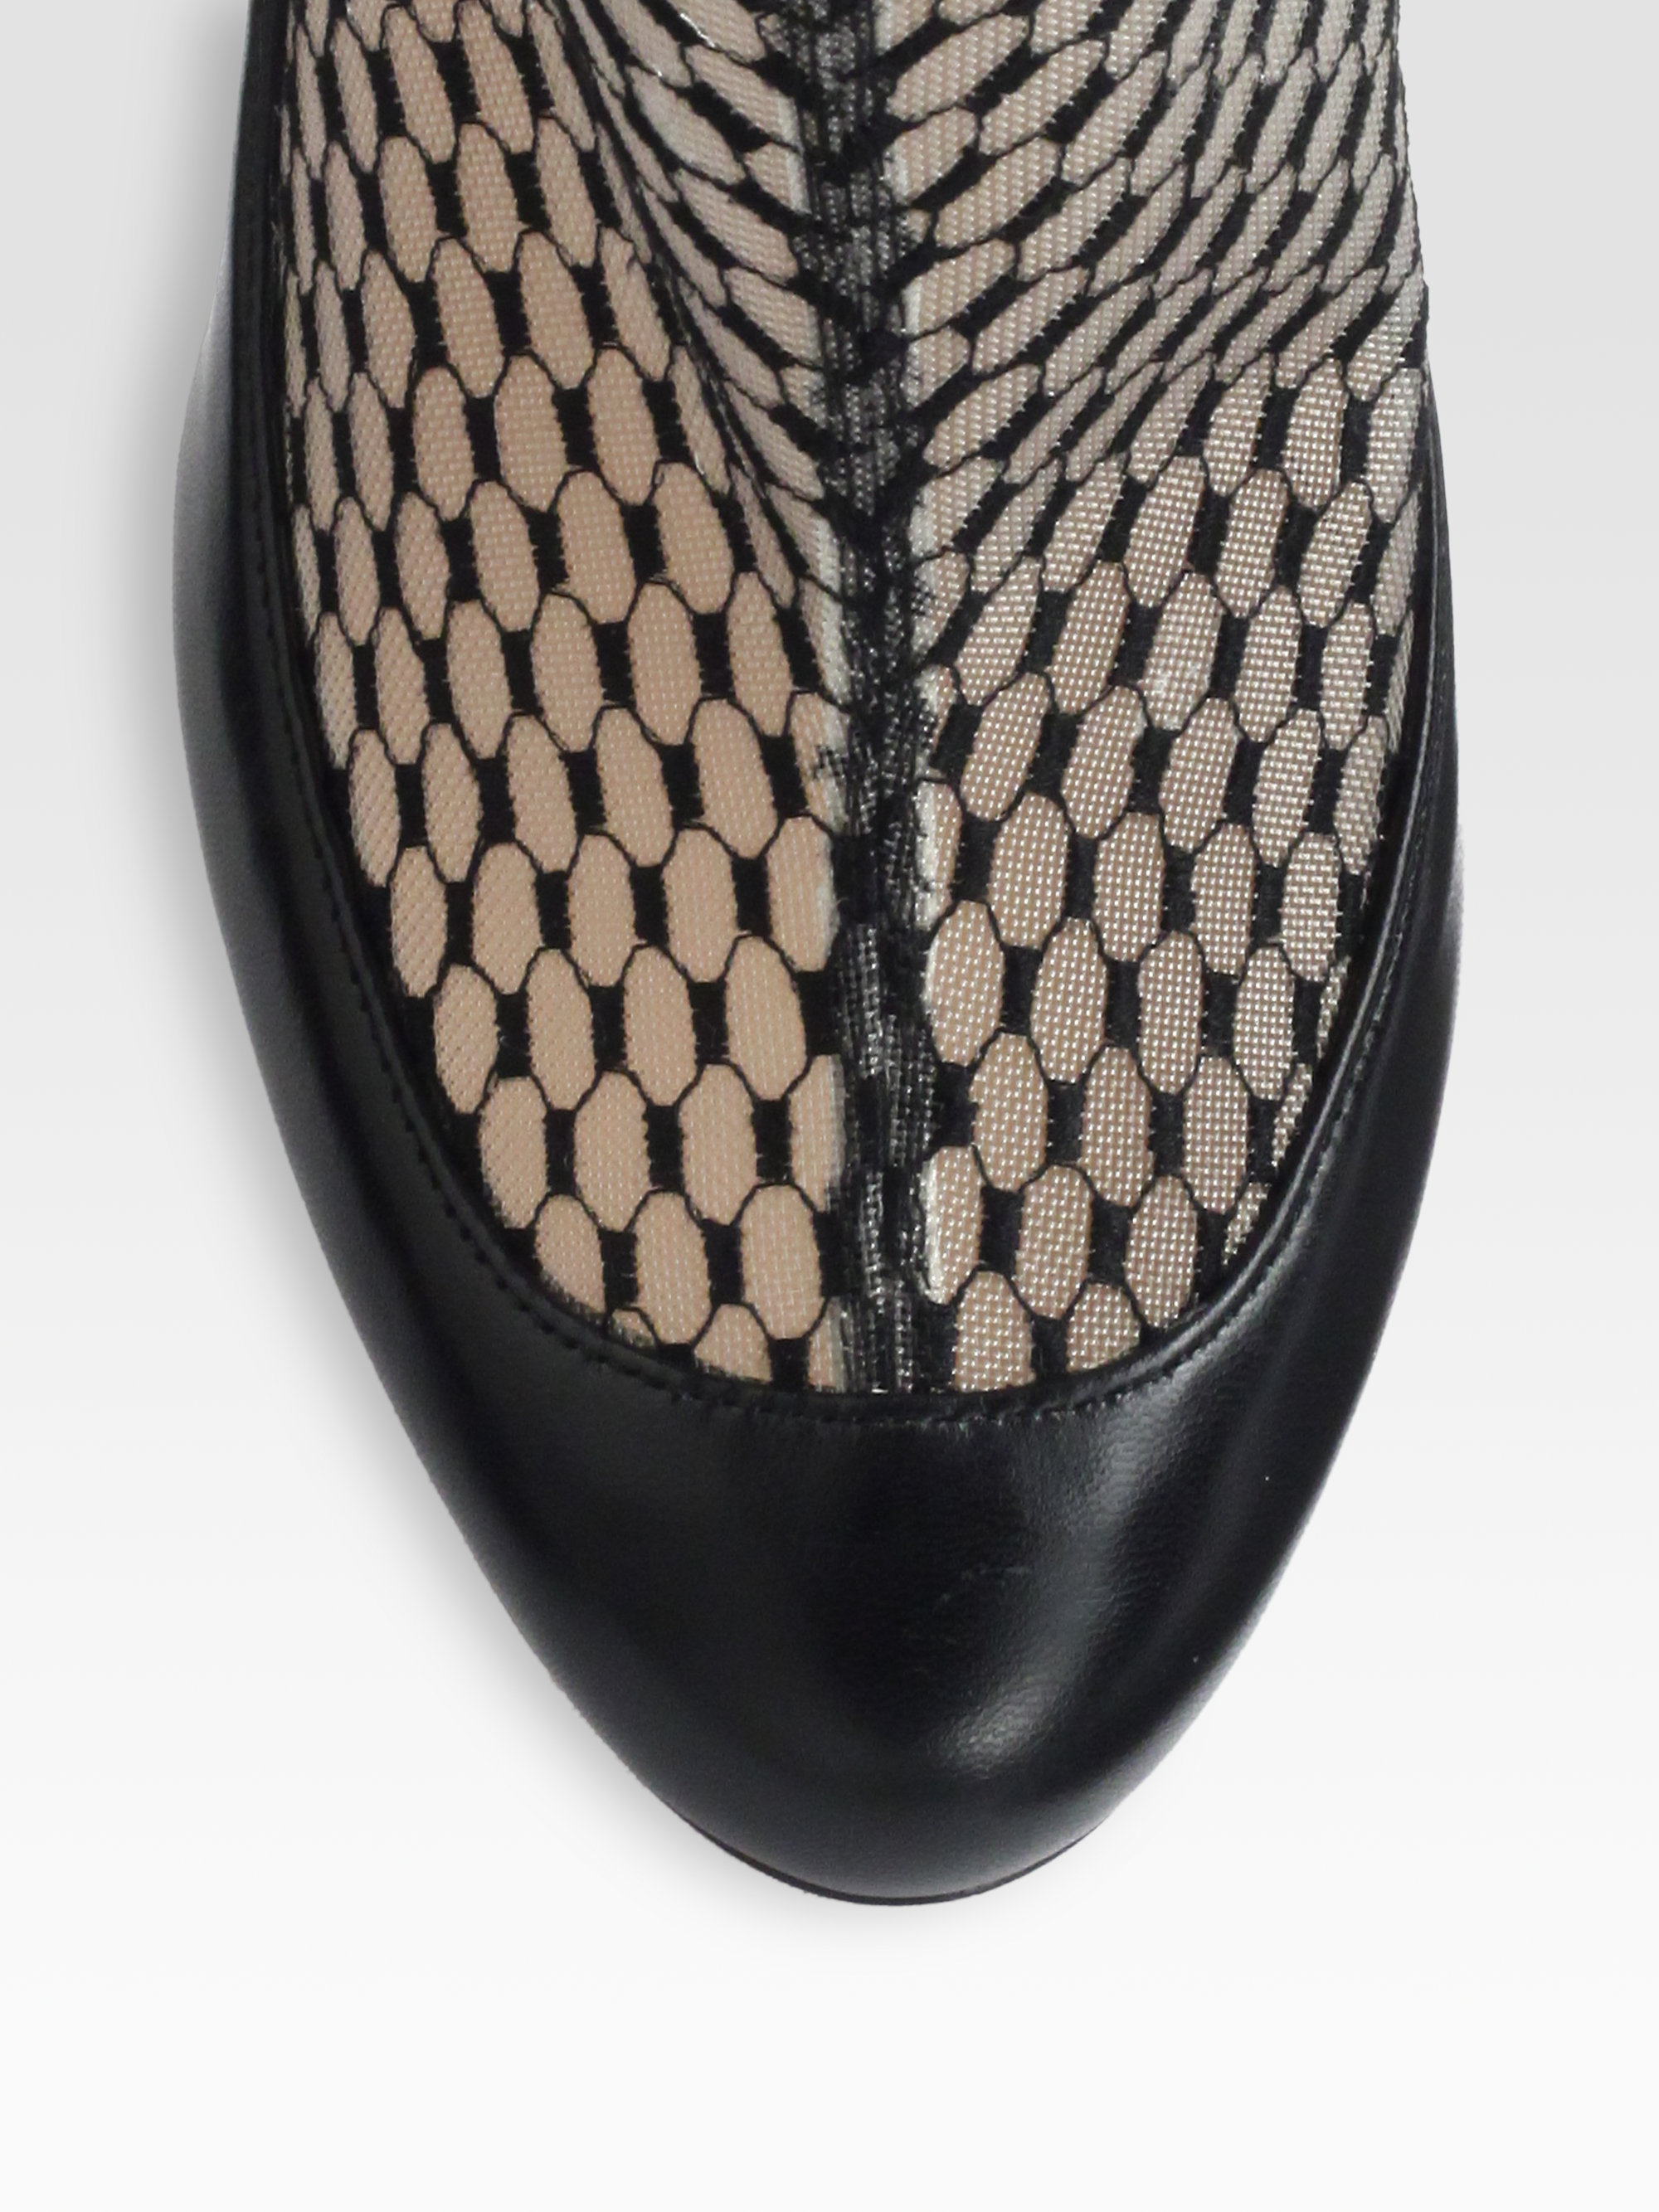 Christian louboutin Anna May Lace Leather Ankle Boots in Black | Lyst